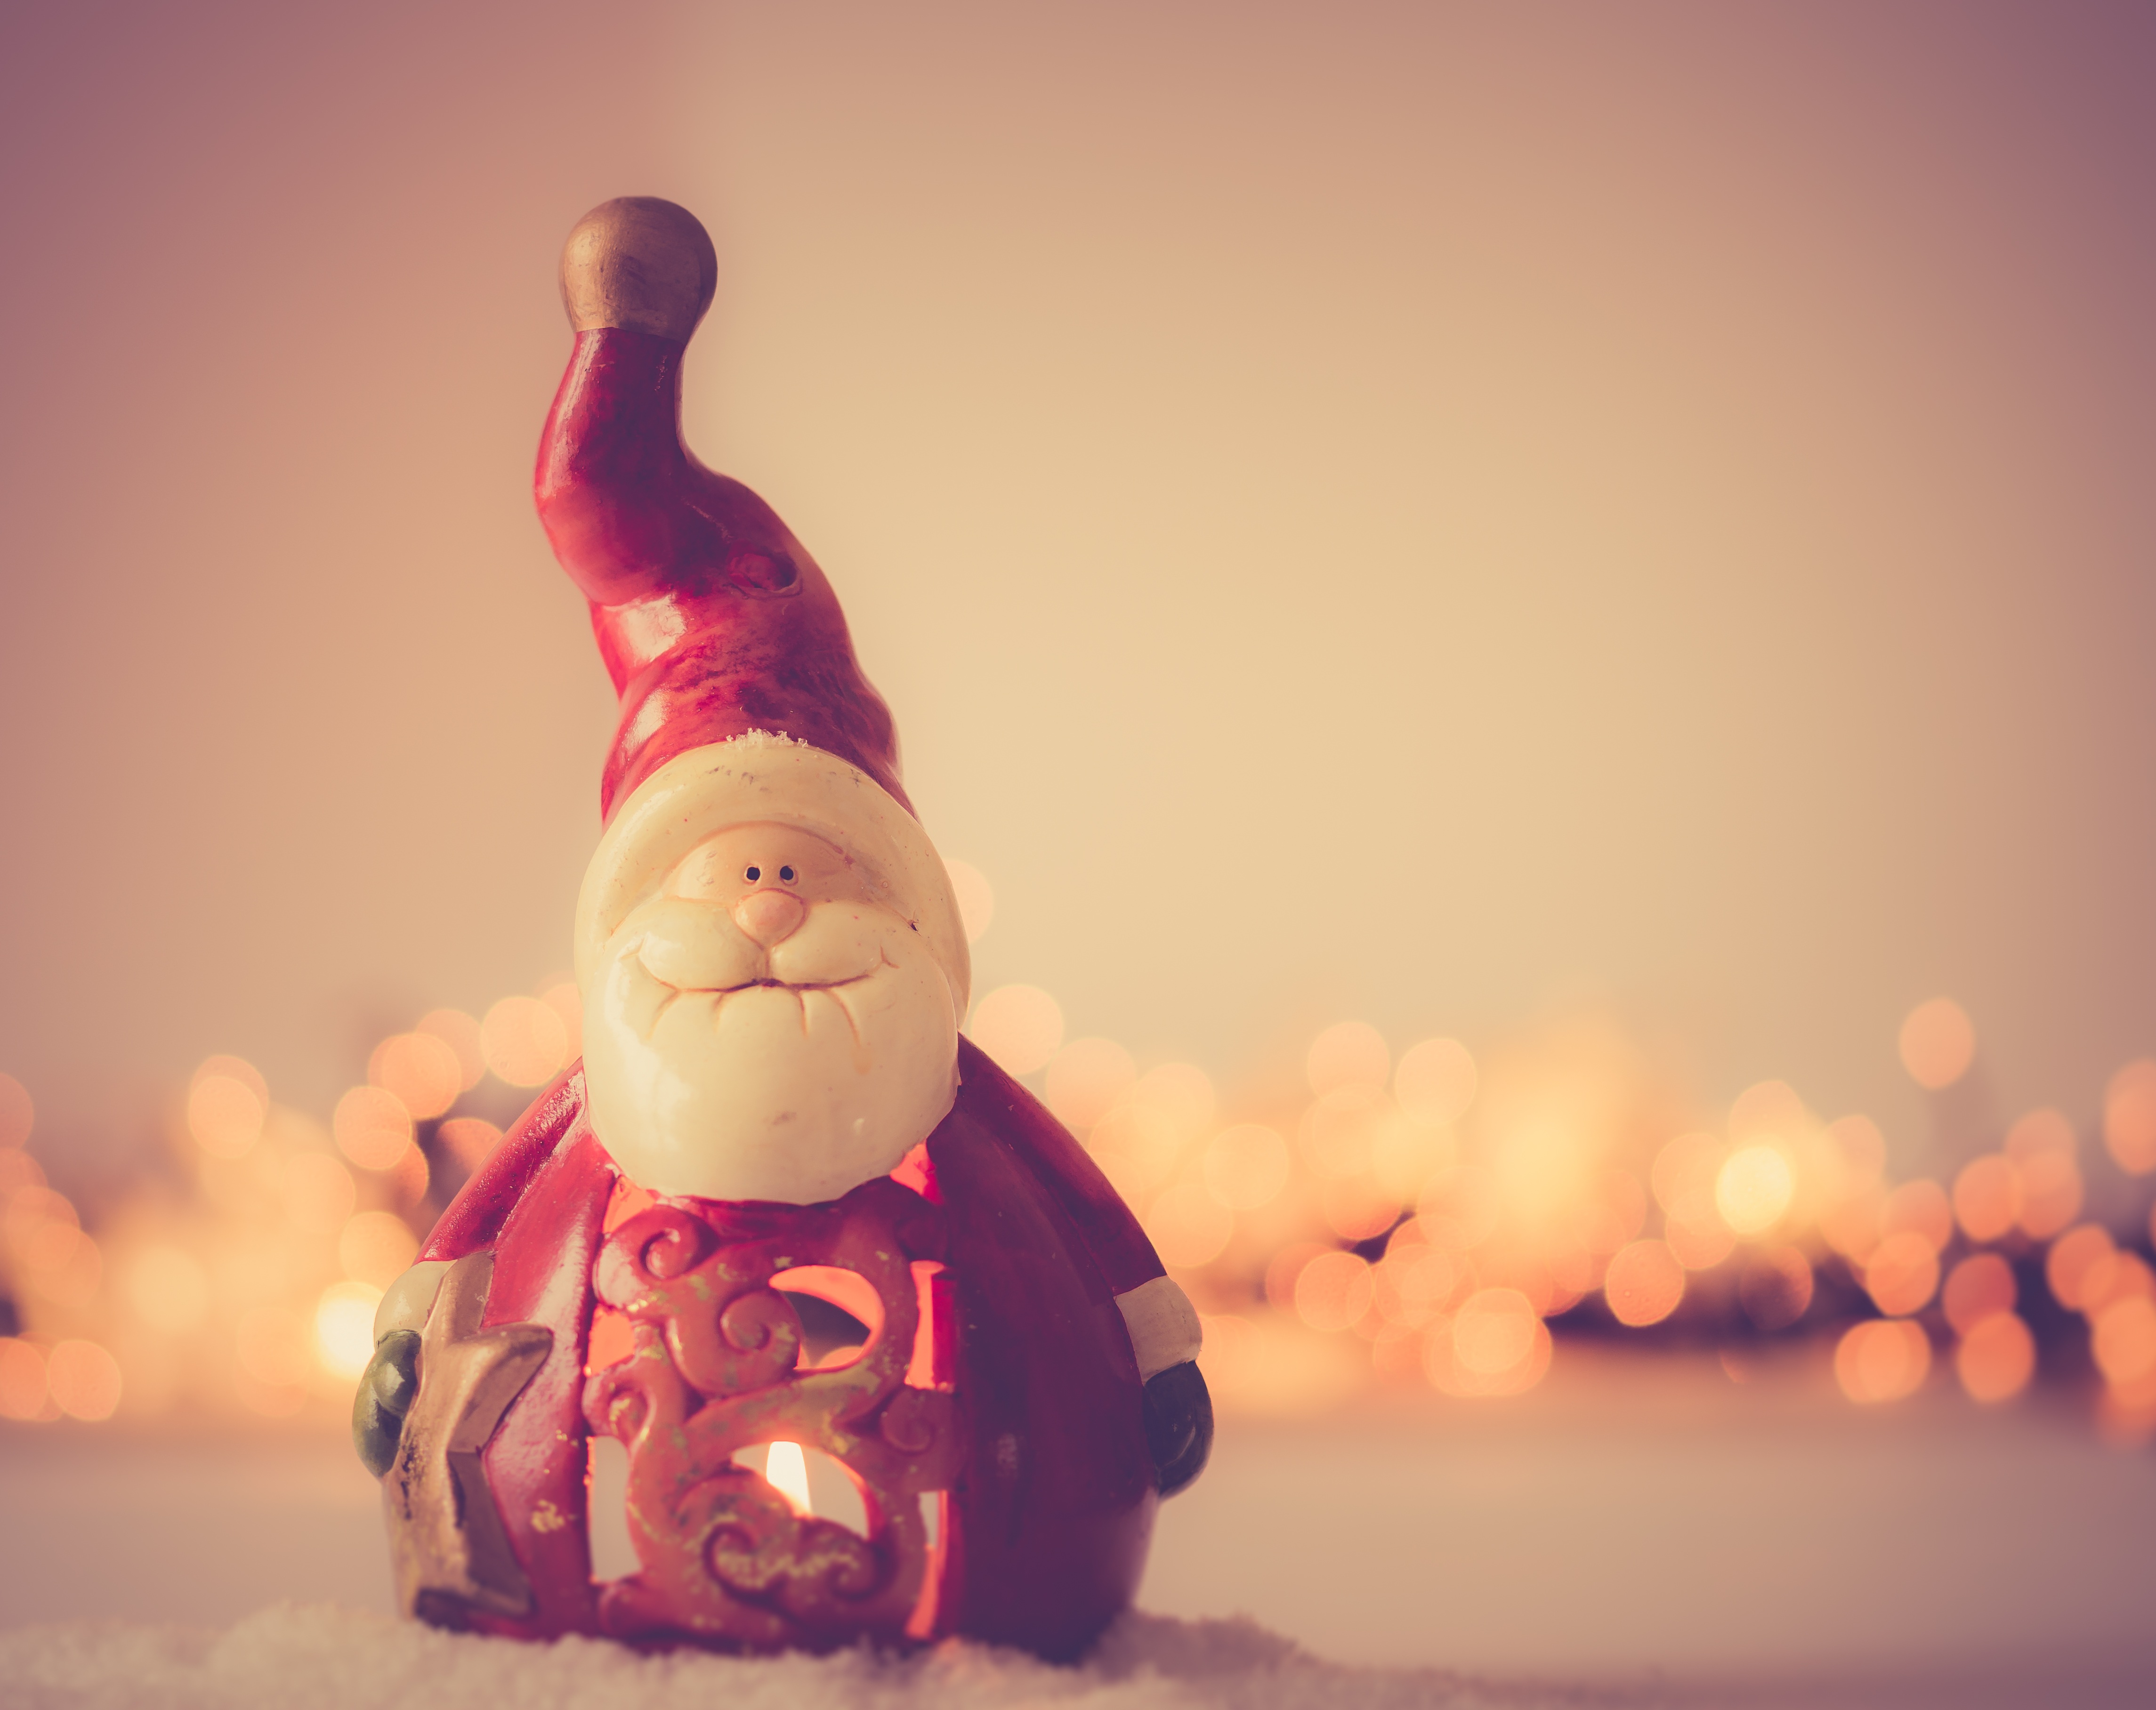 108620 download wallpaper holidays, new year, jack frost, santa claus, christmas screensavers and pictures for free